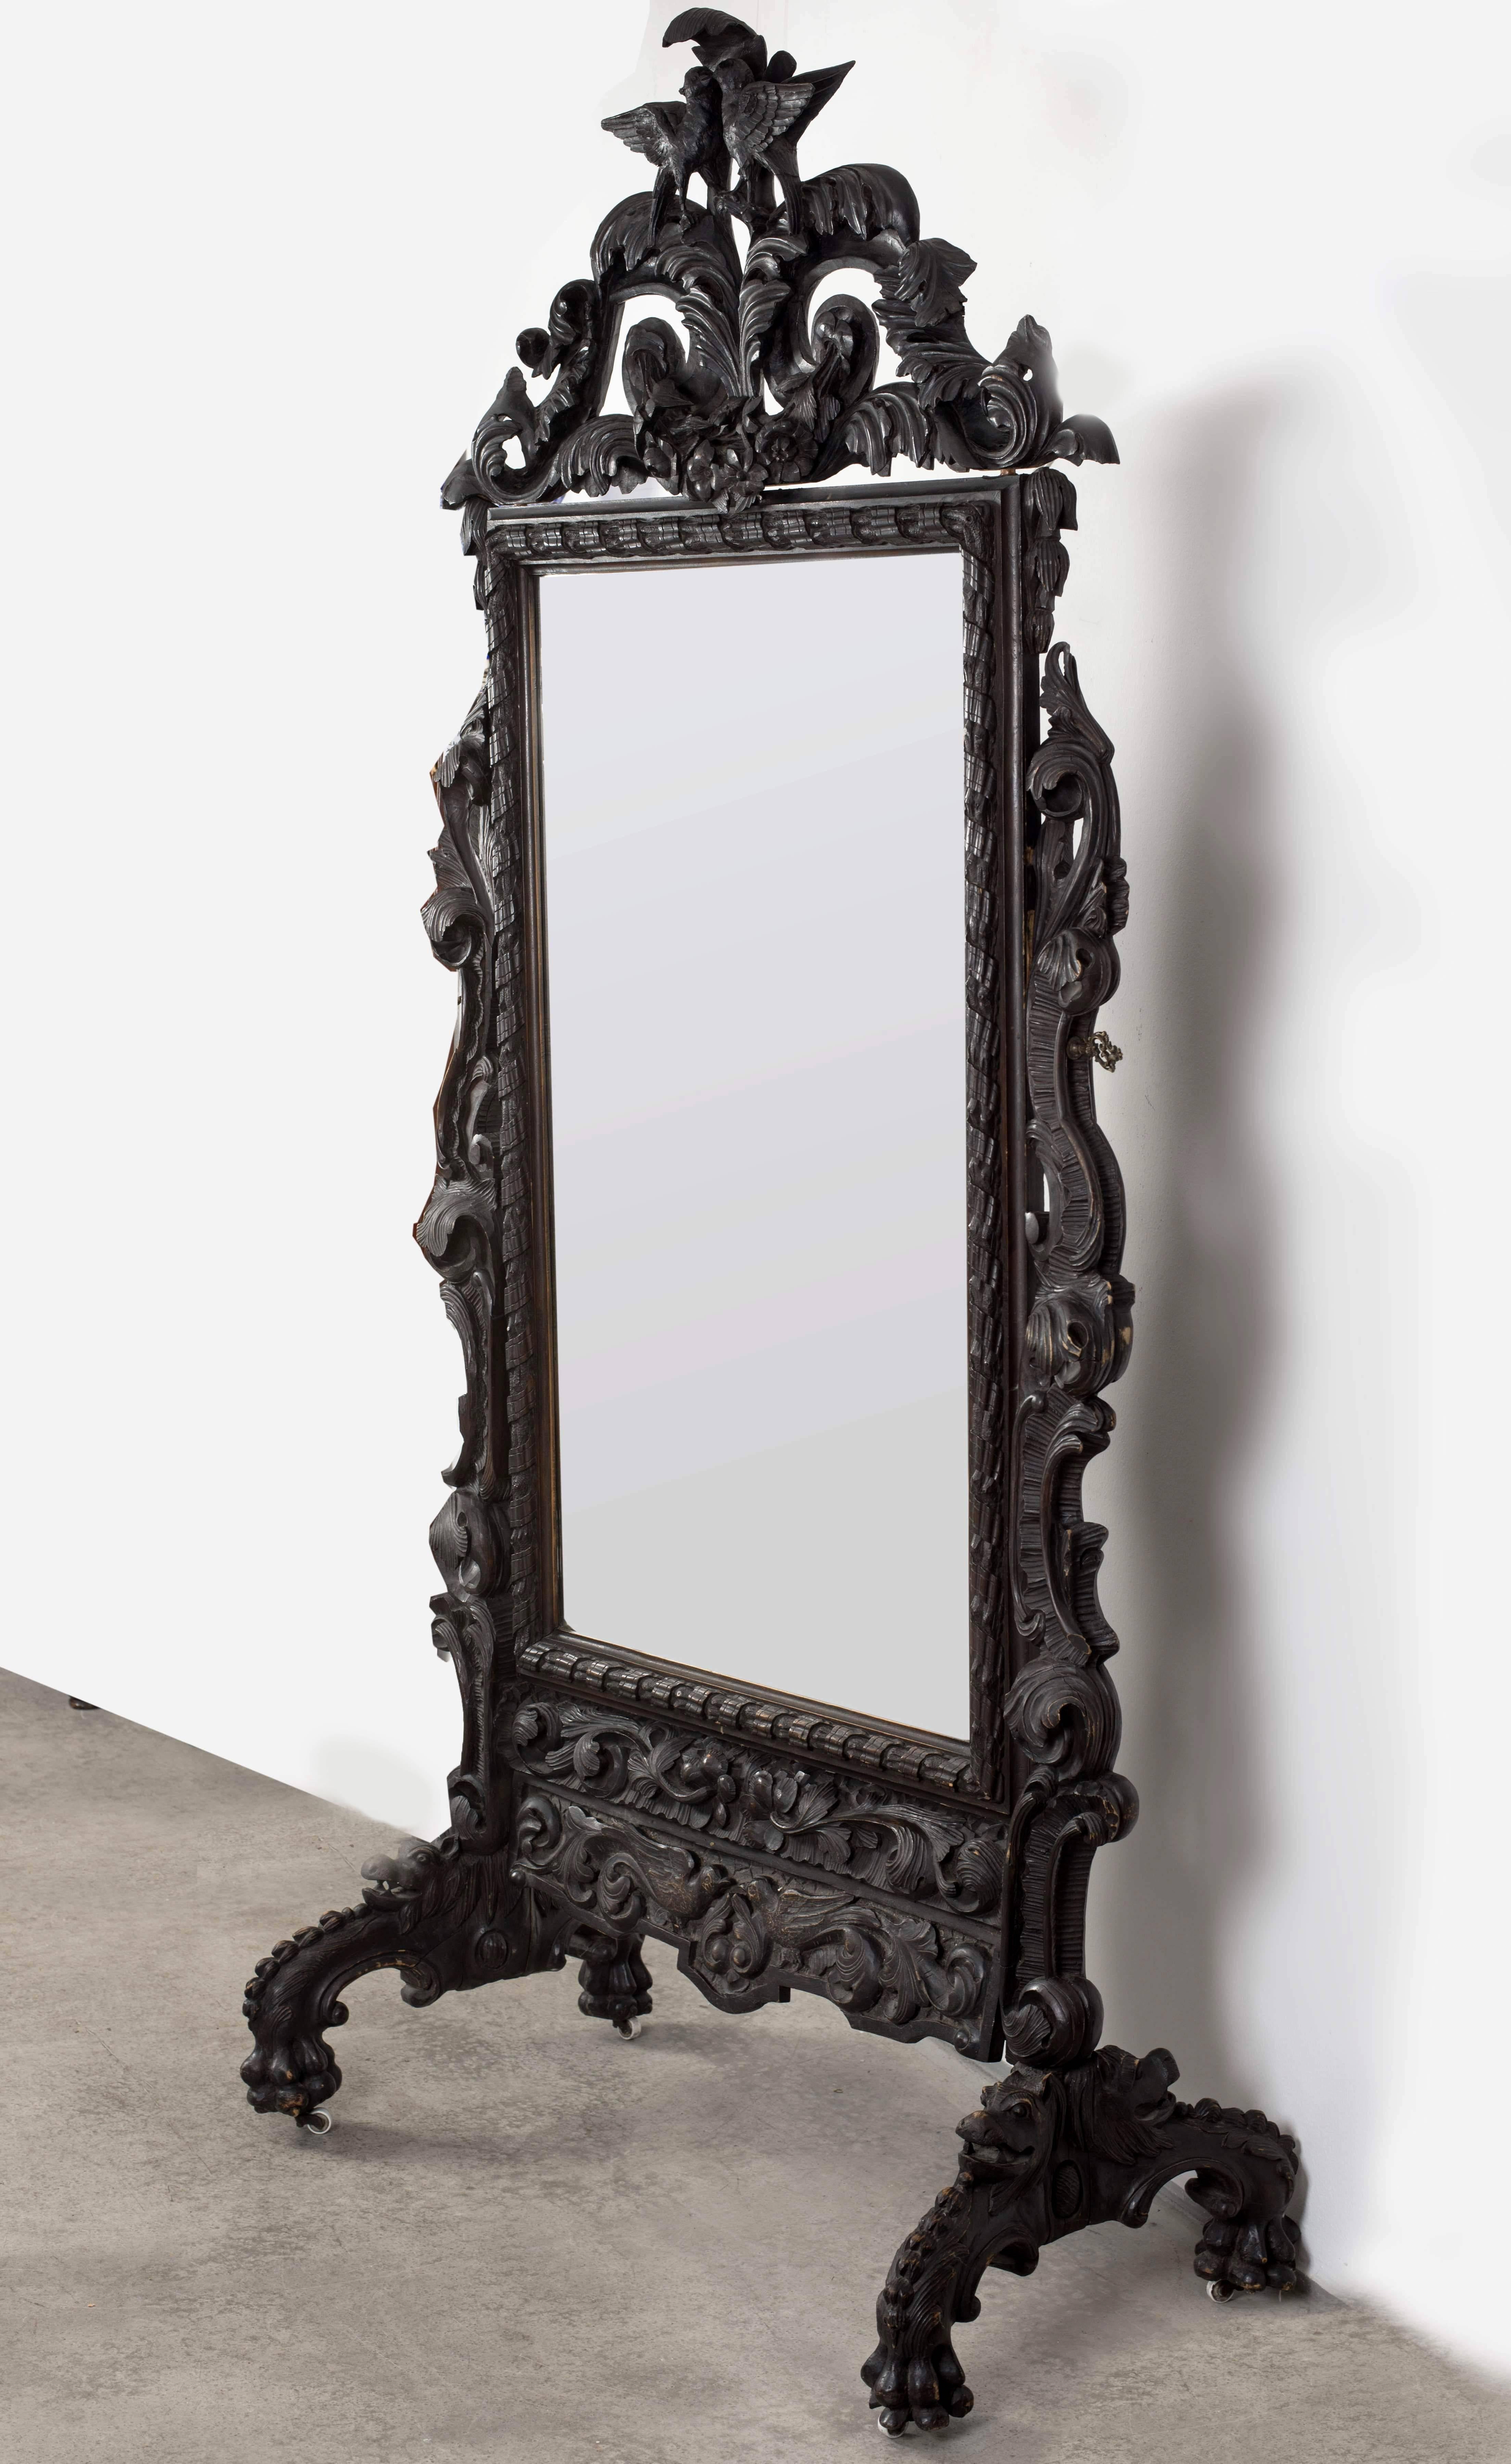 Hungarian Fine Baroque Style Psyche Mirror, Budapest, 1840s